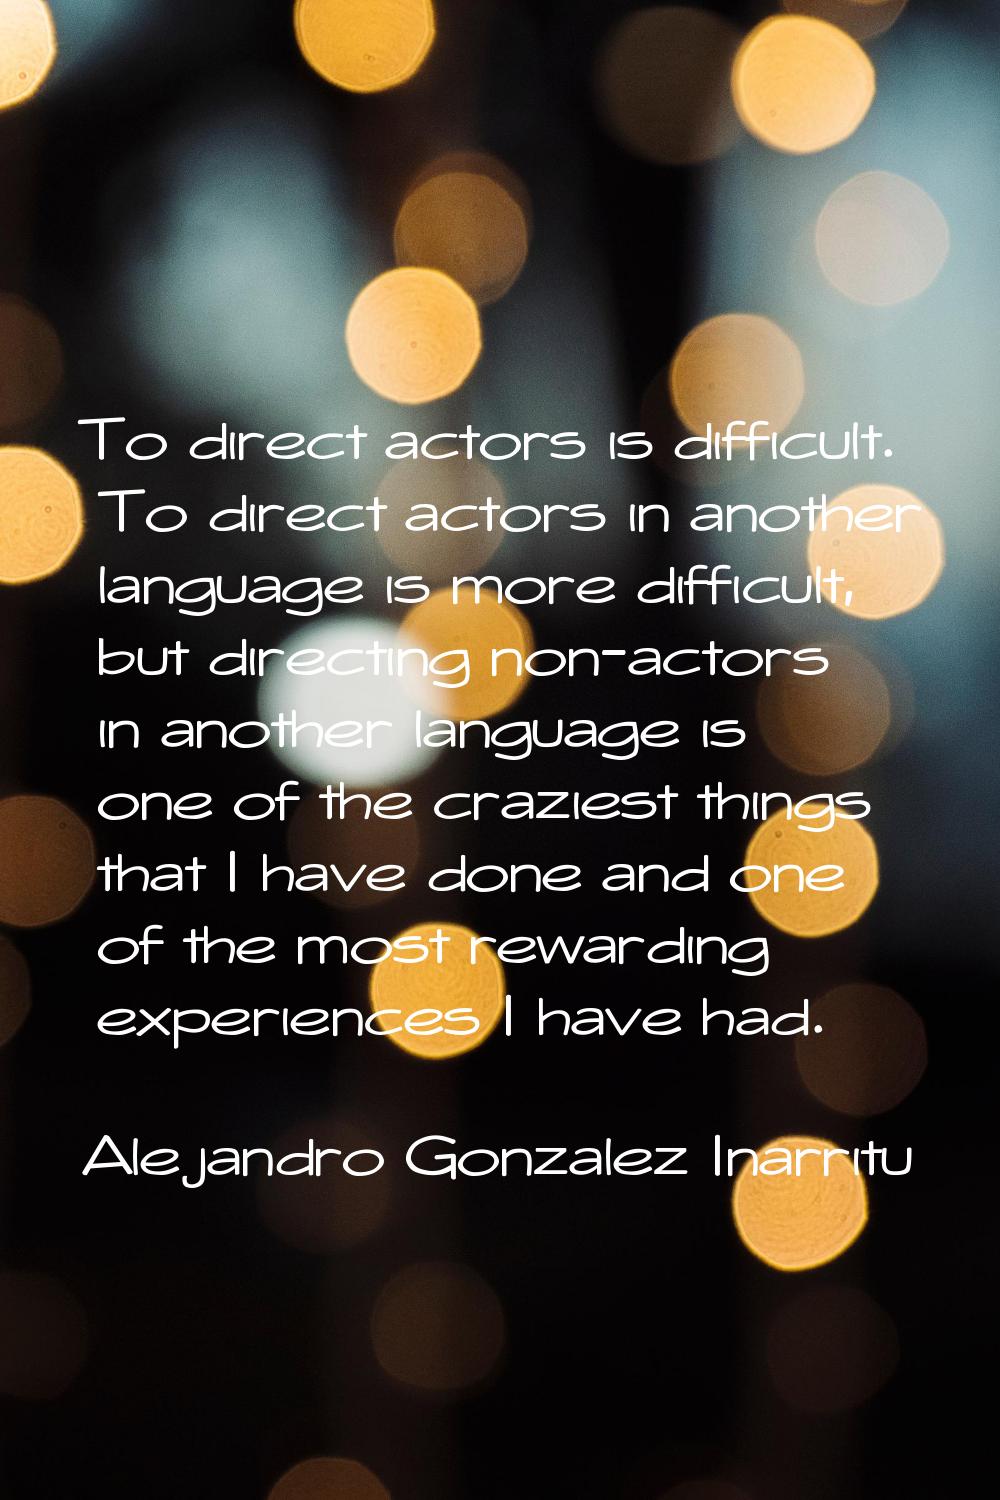 To direct actors is difficult. To direct actors in another language is more difficult, but directin